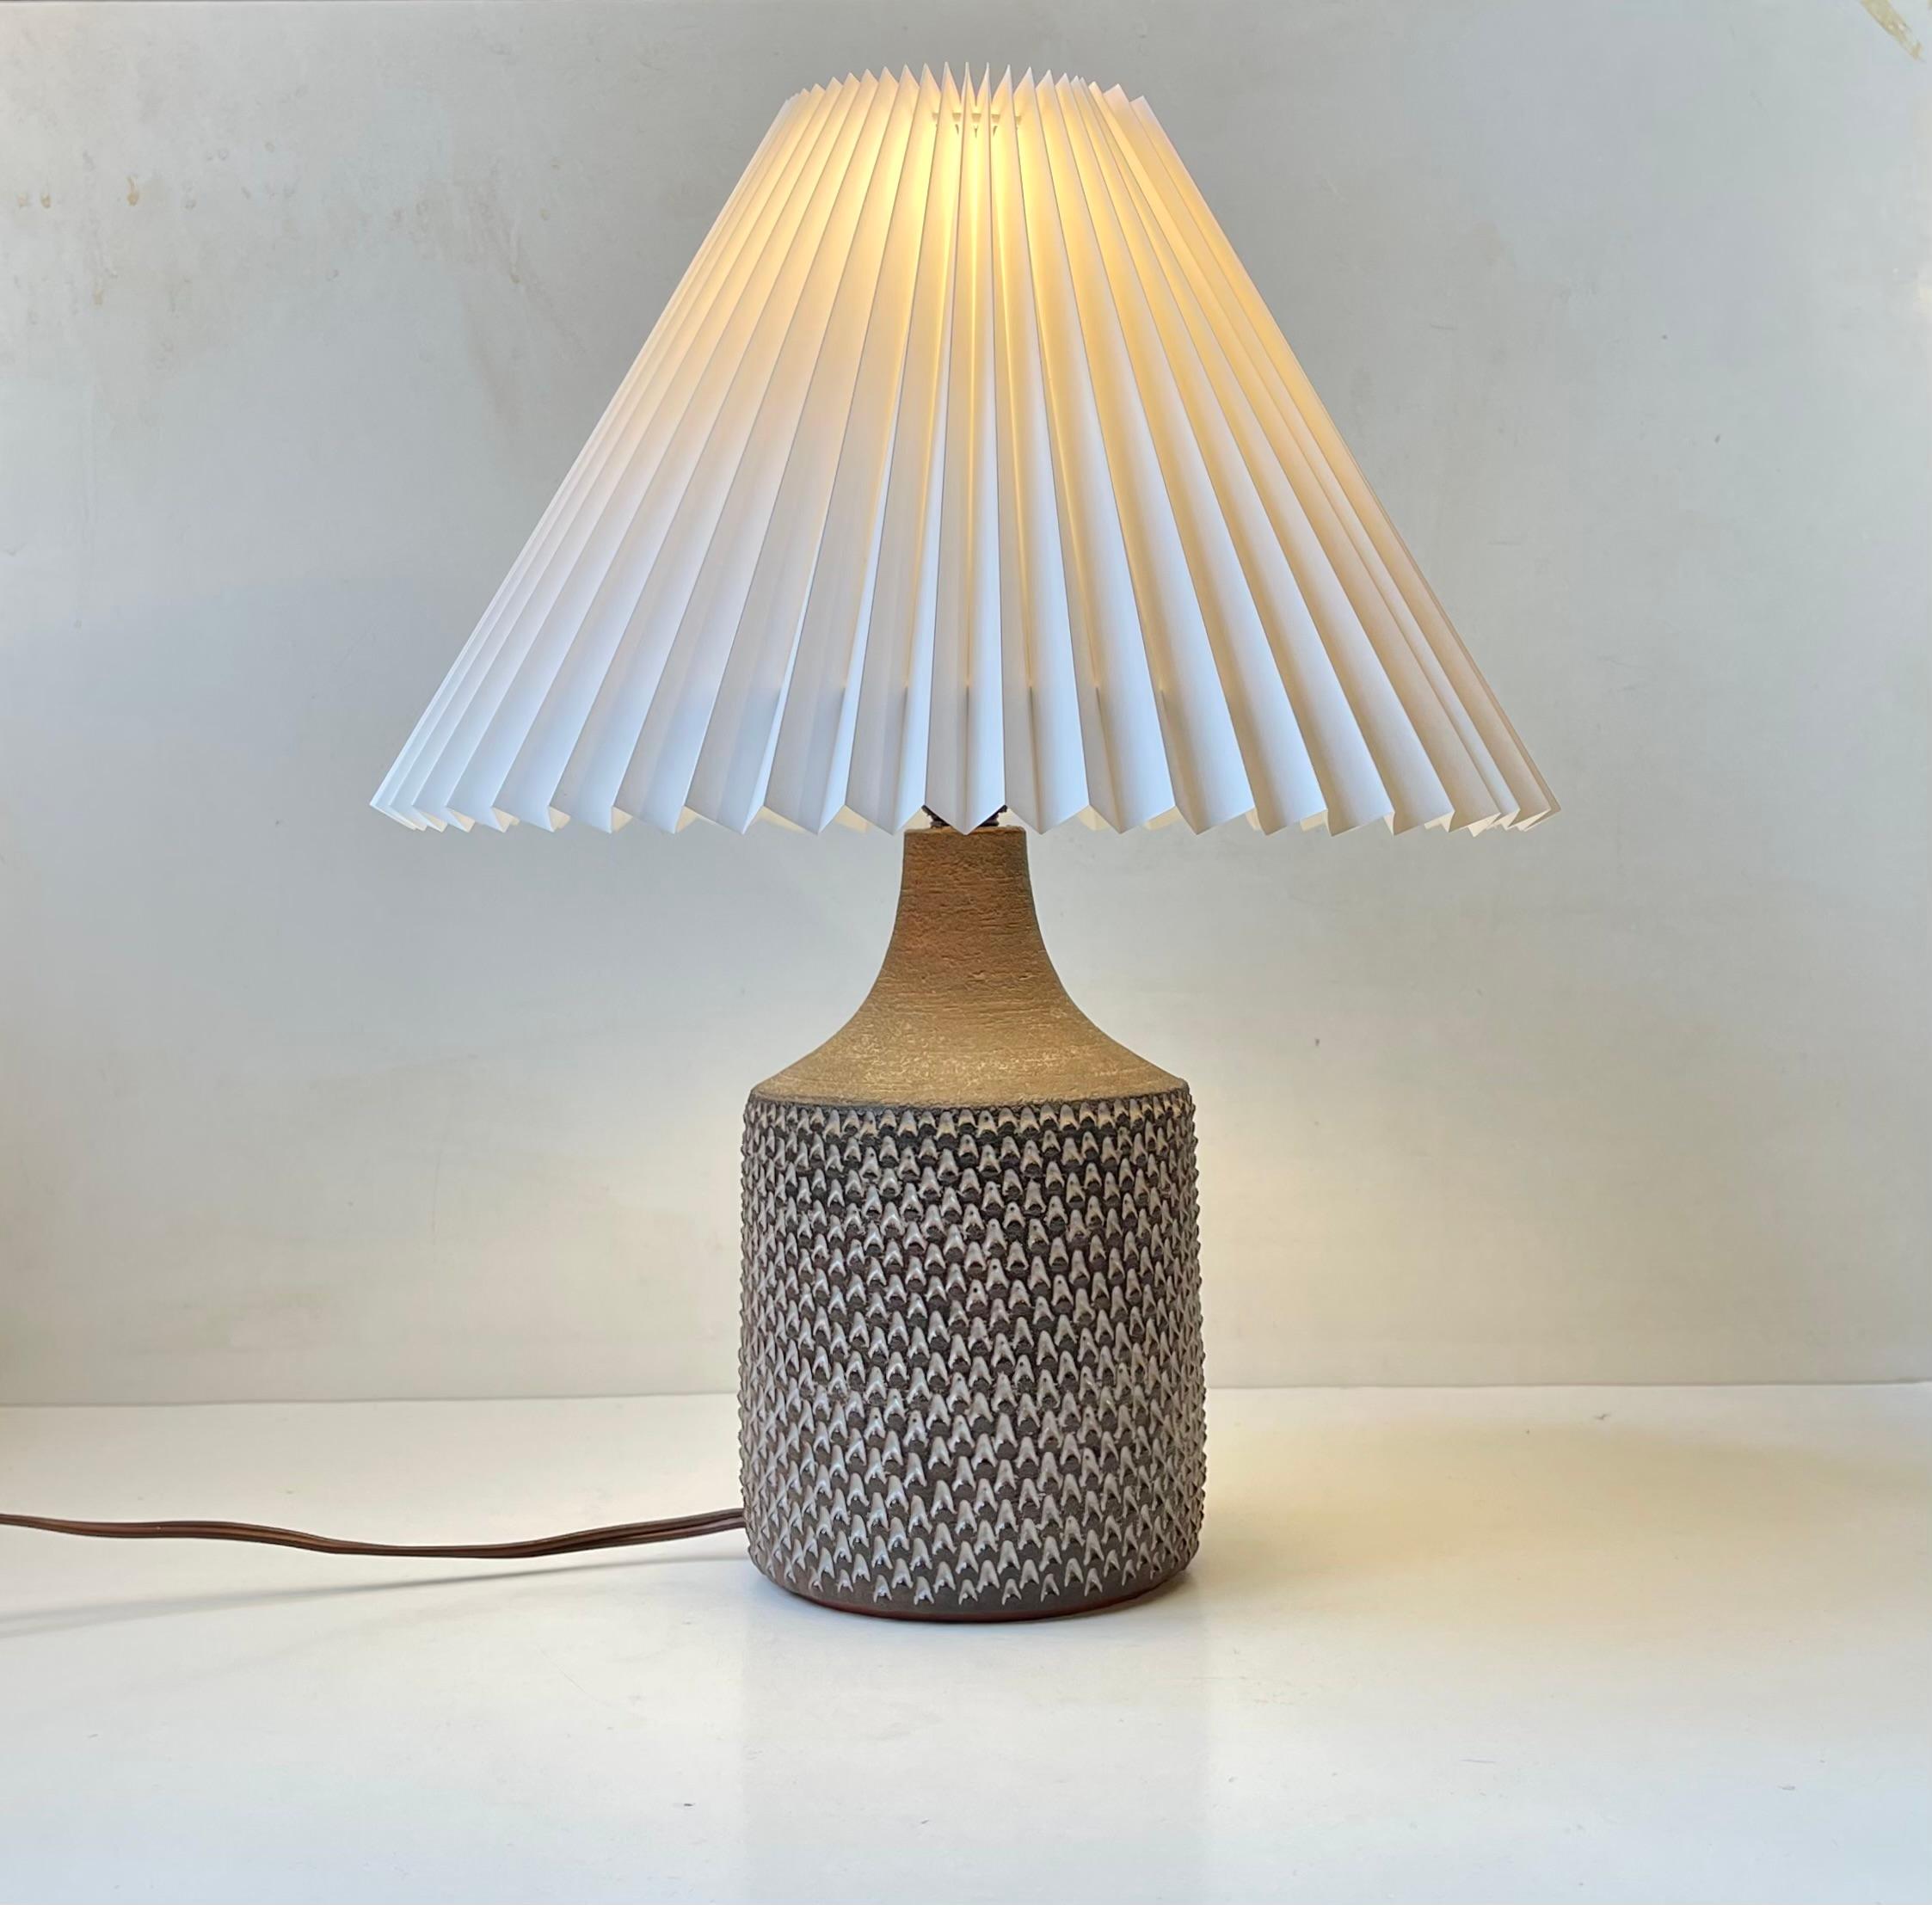 Late 20th Century Danish Modern Jytte Trebbien Ceramic Table Lamp in 'Budded' Style for Tusbo For Sale